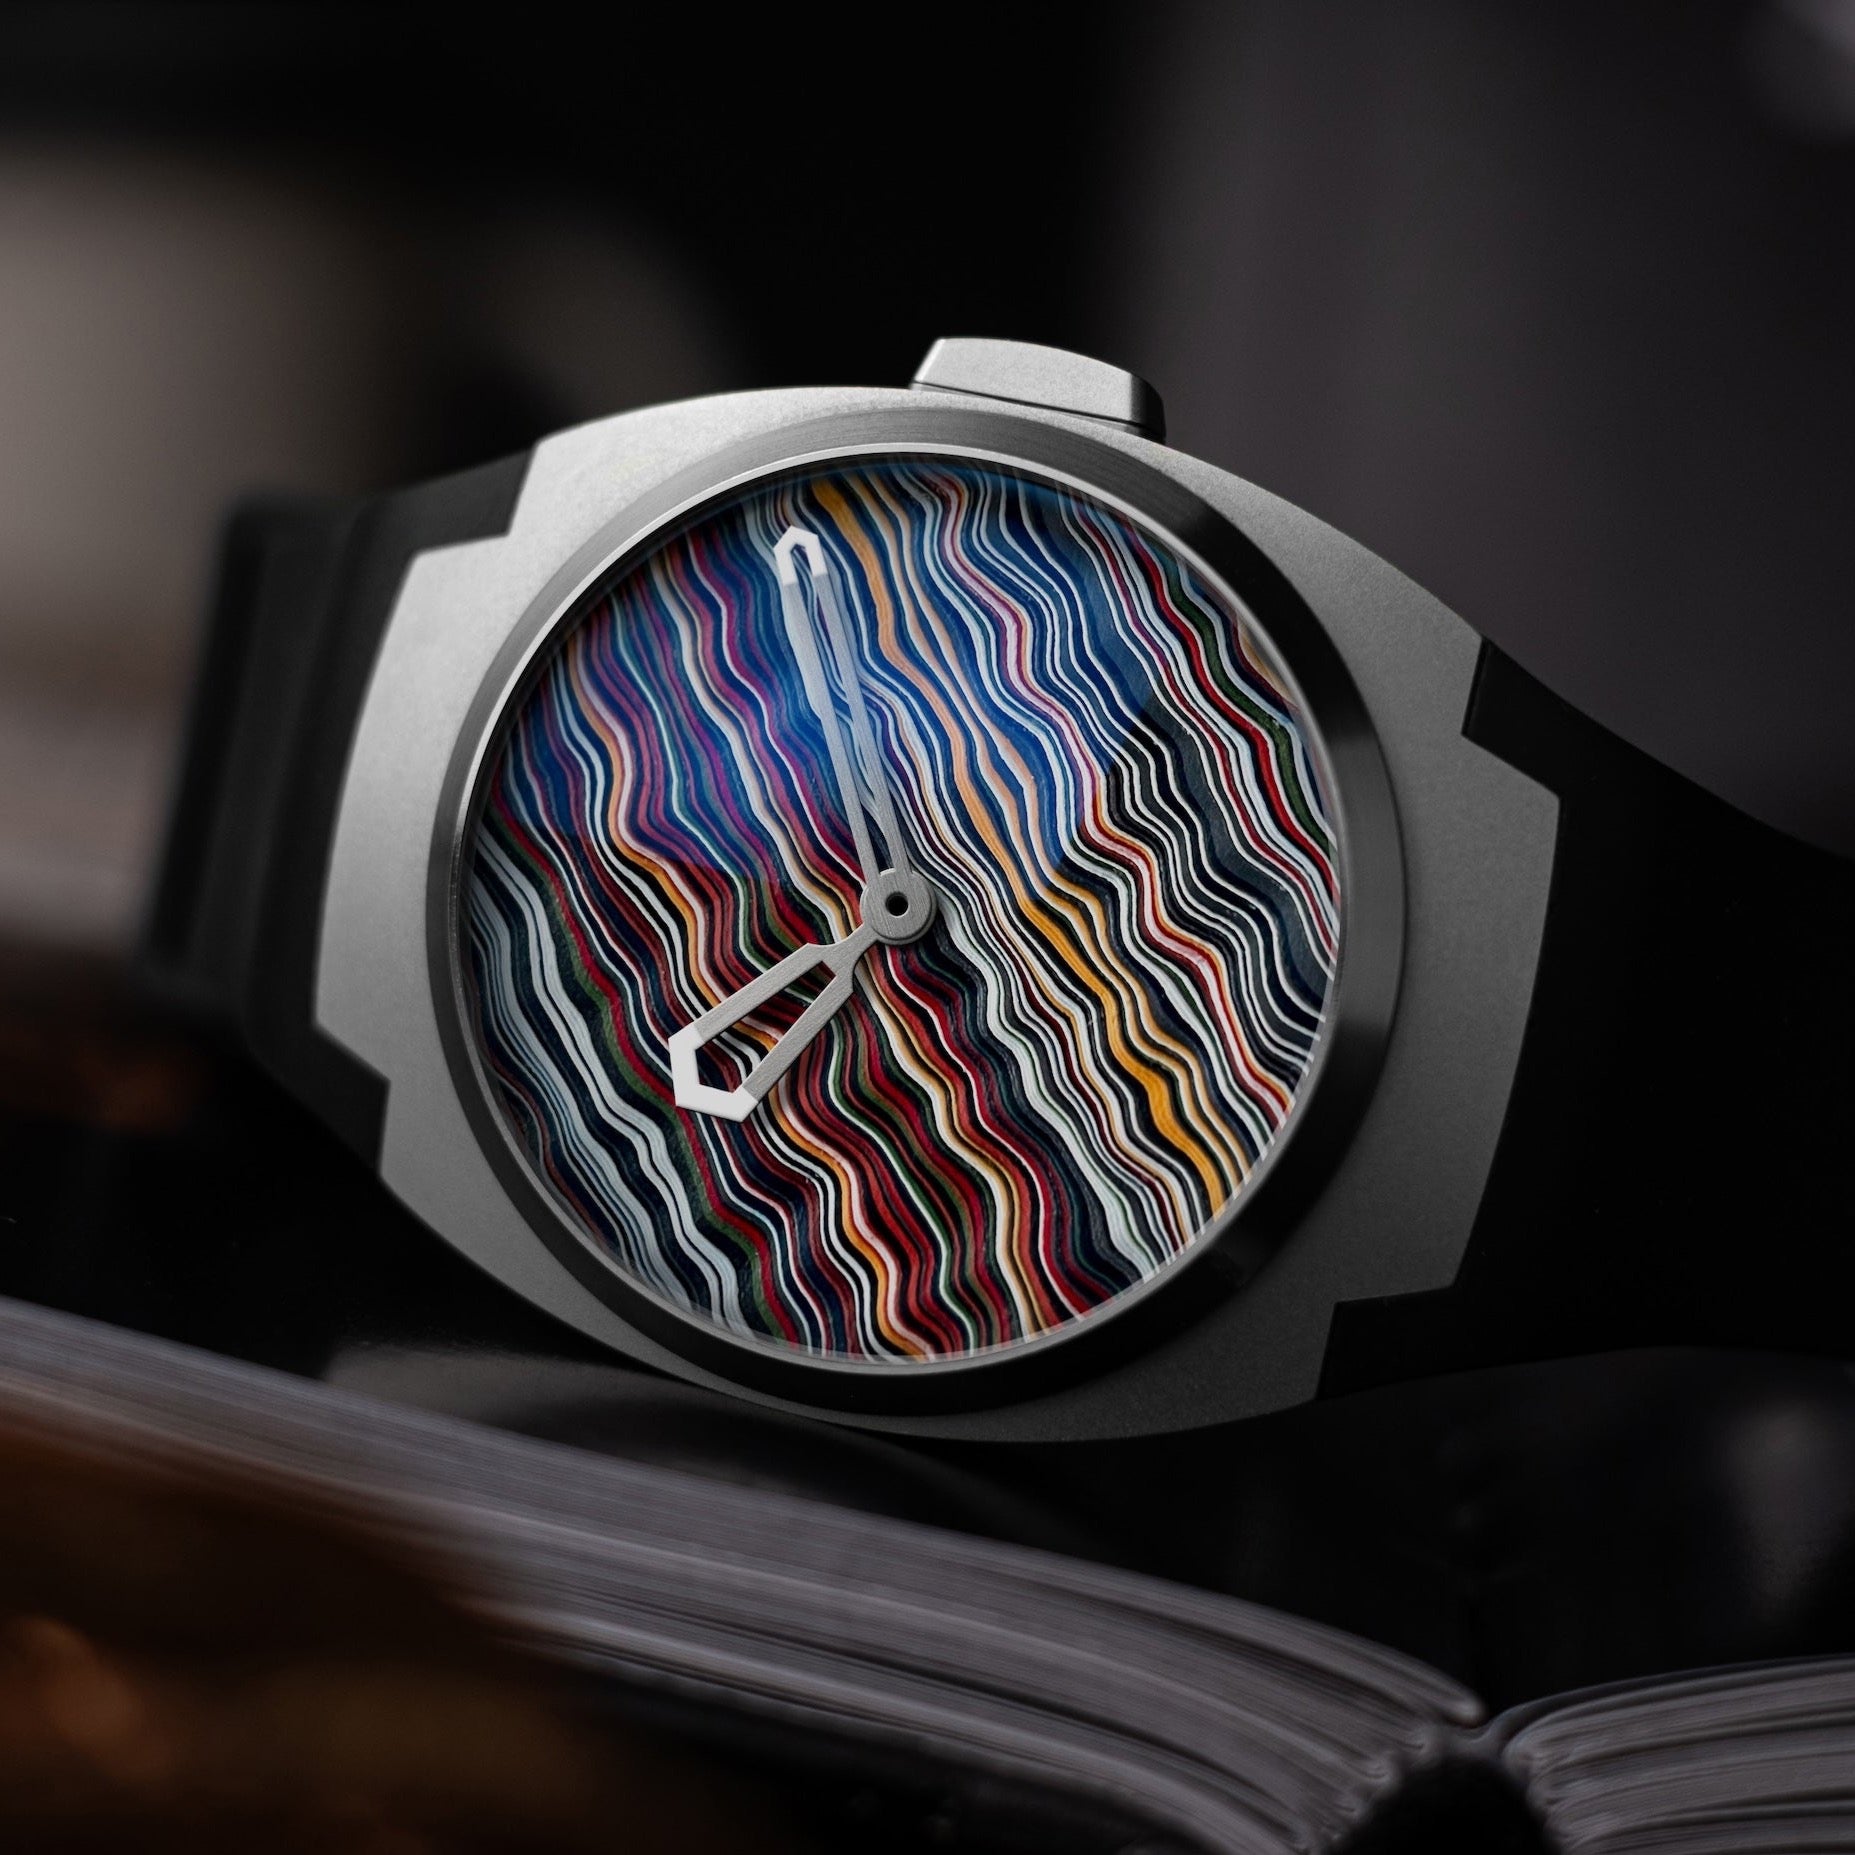 ARC II — Ripple Milled Fordite "Milly Vanilly"